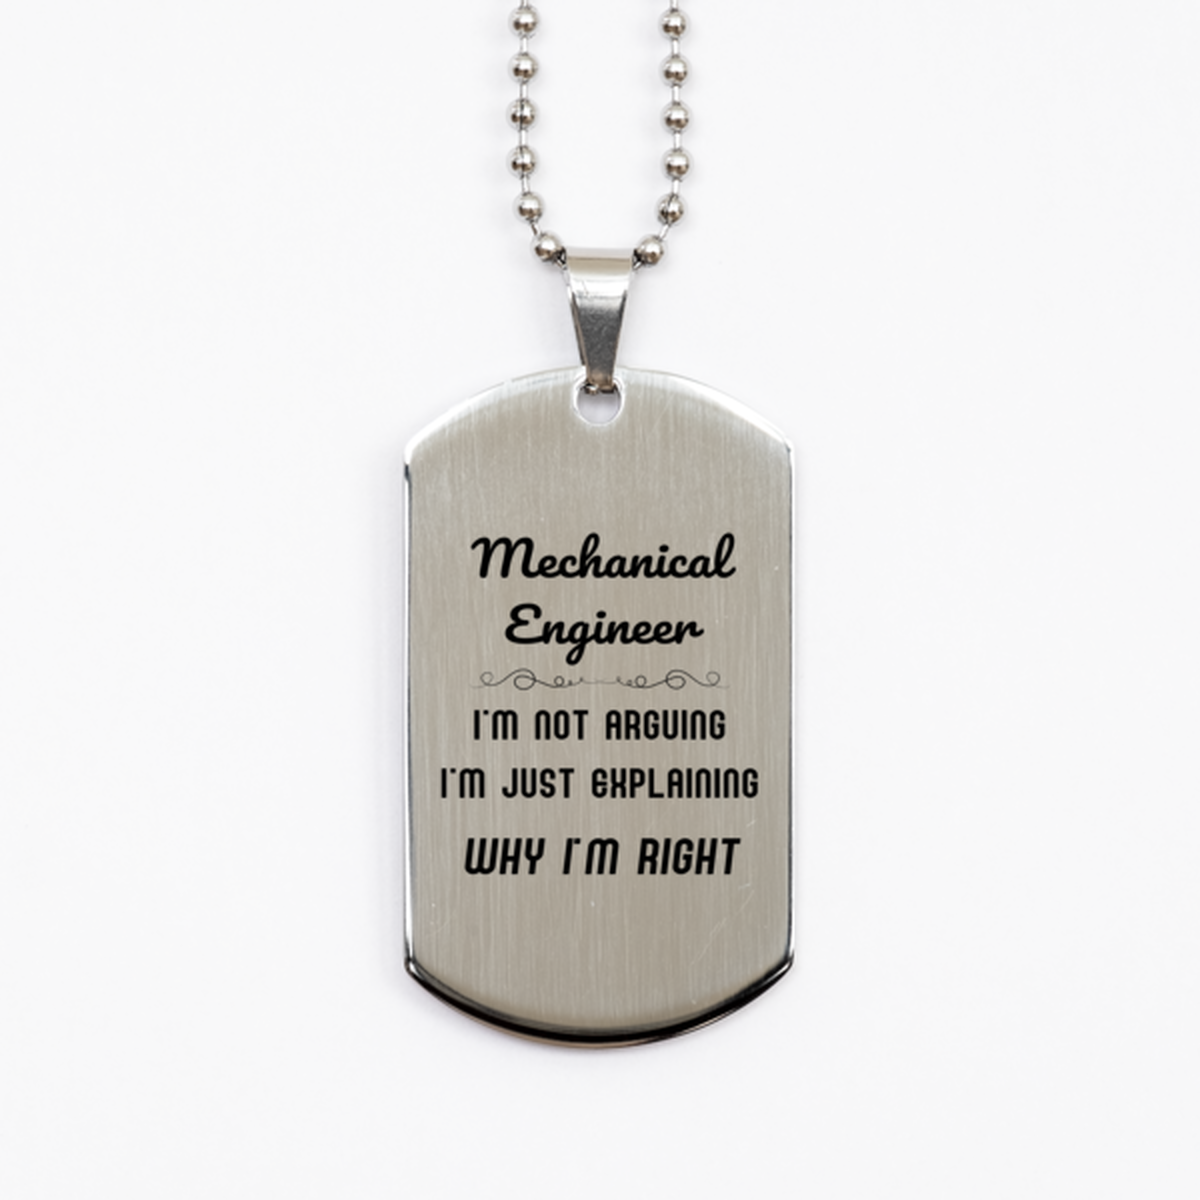 Mechanical Engineer I'm not Arguing. I'm Just Explaining Why I'm RIGHT Silver Dog Tag, Funny Saying Quote Mechanical Engineer Gifts For Mechanical Engineer Graduation Birthday Christmas Gifts for Men Women Coworker